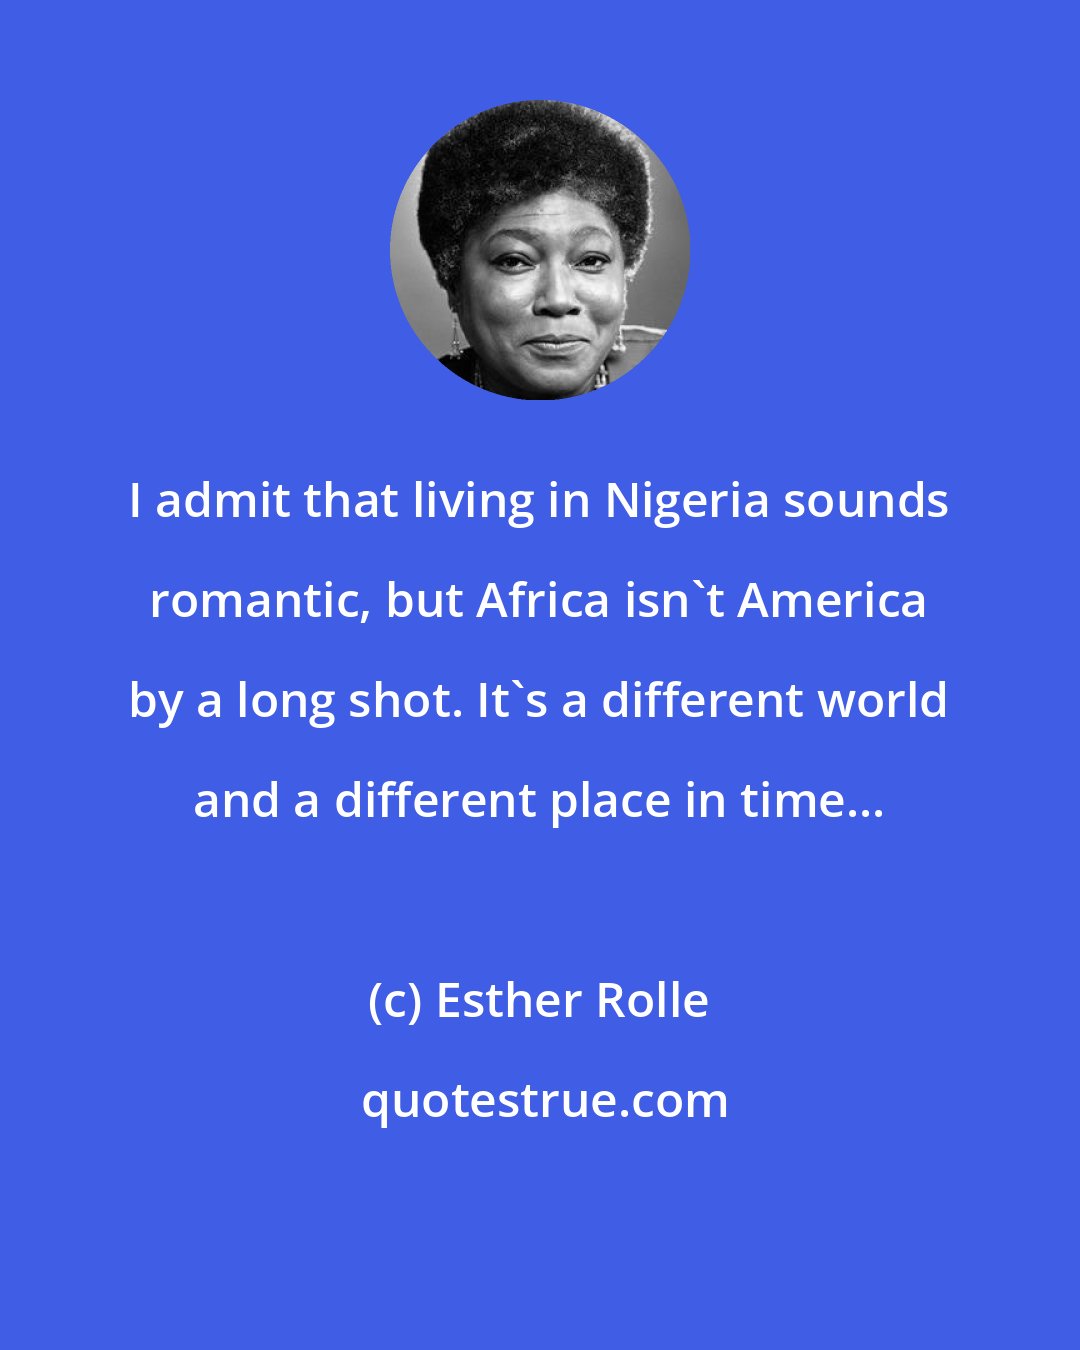 Esther Rolle: I admit that living in Nigeria sounds romantic, but Africa isn't America by a long shot. It's a different world and a different place in time...